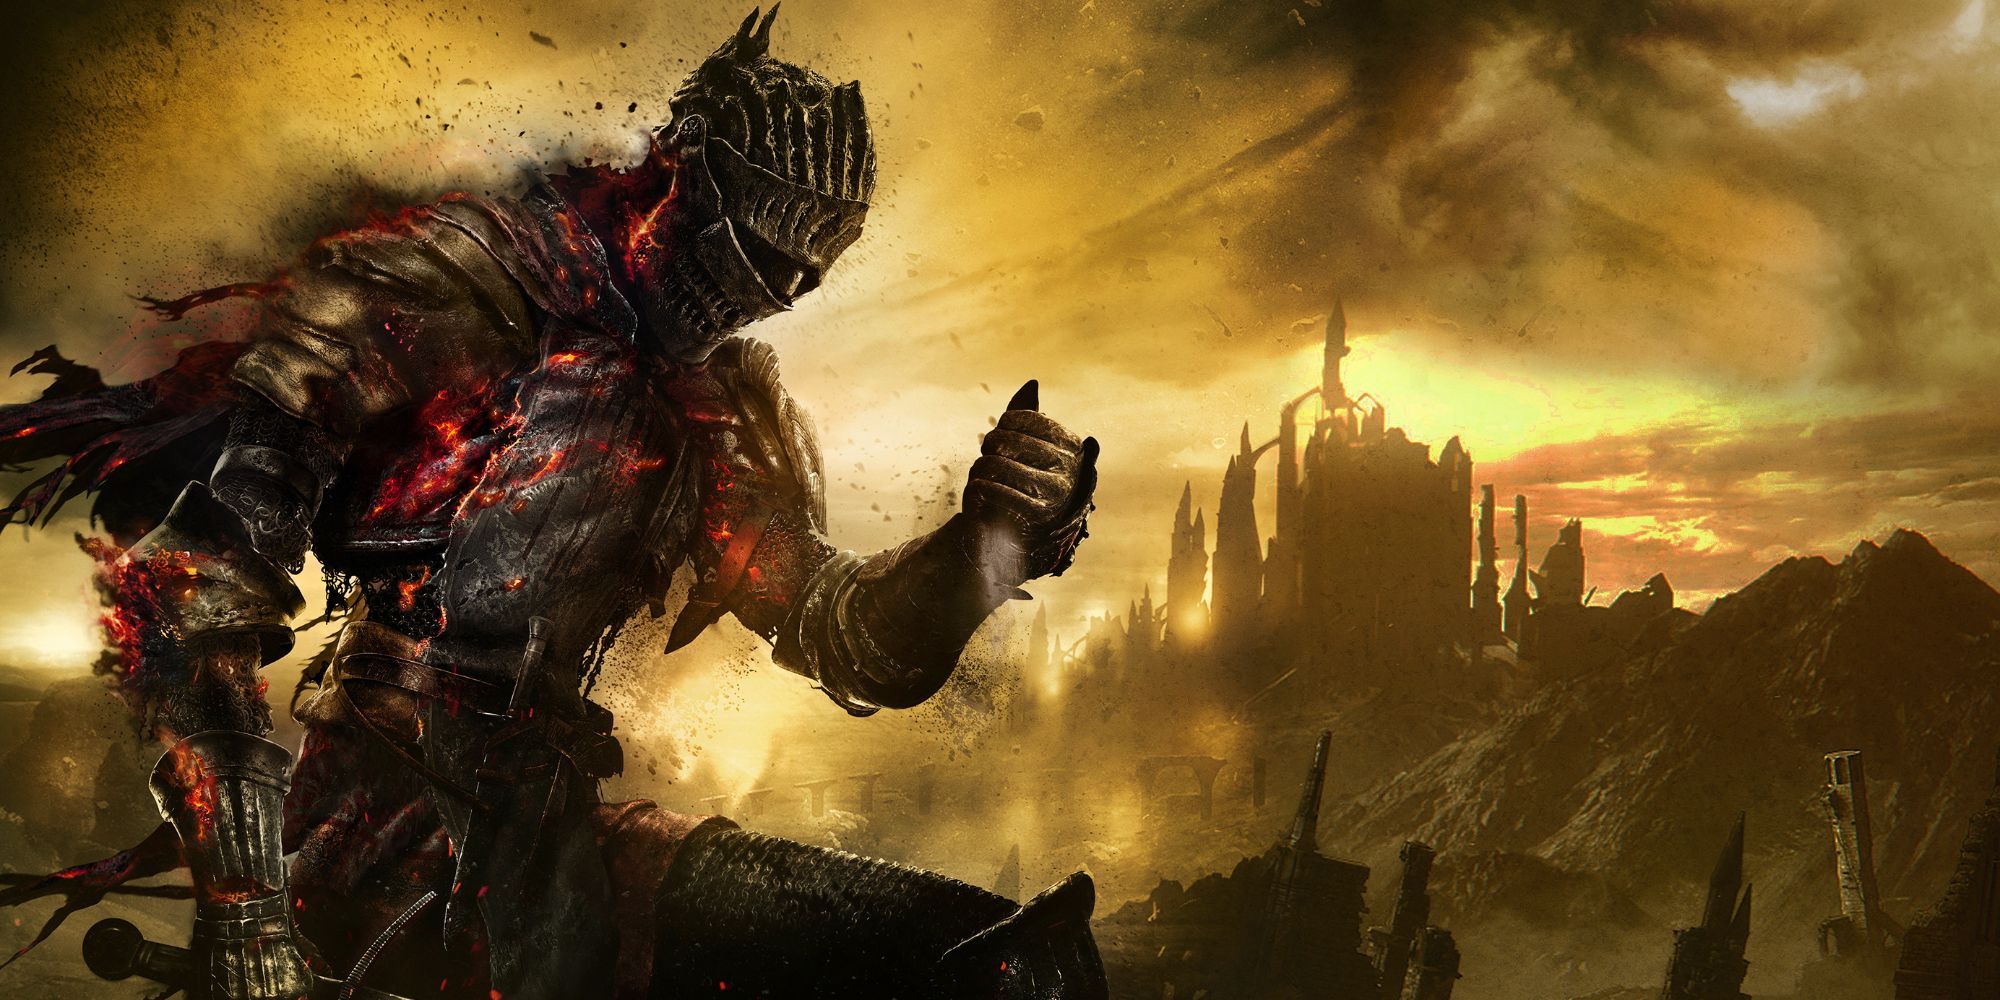 poster of Dark Souls 3 featuring The Ashen One in a black knight's armour with flame outlines